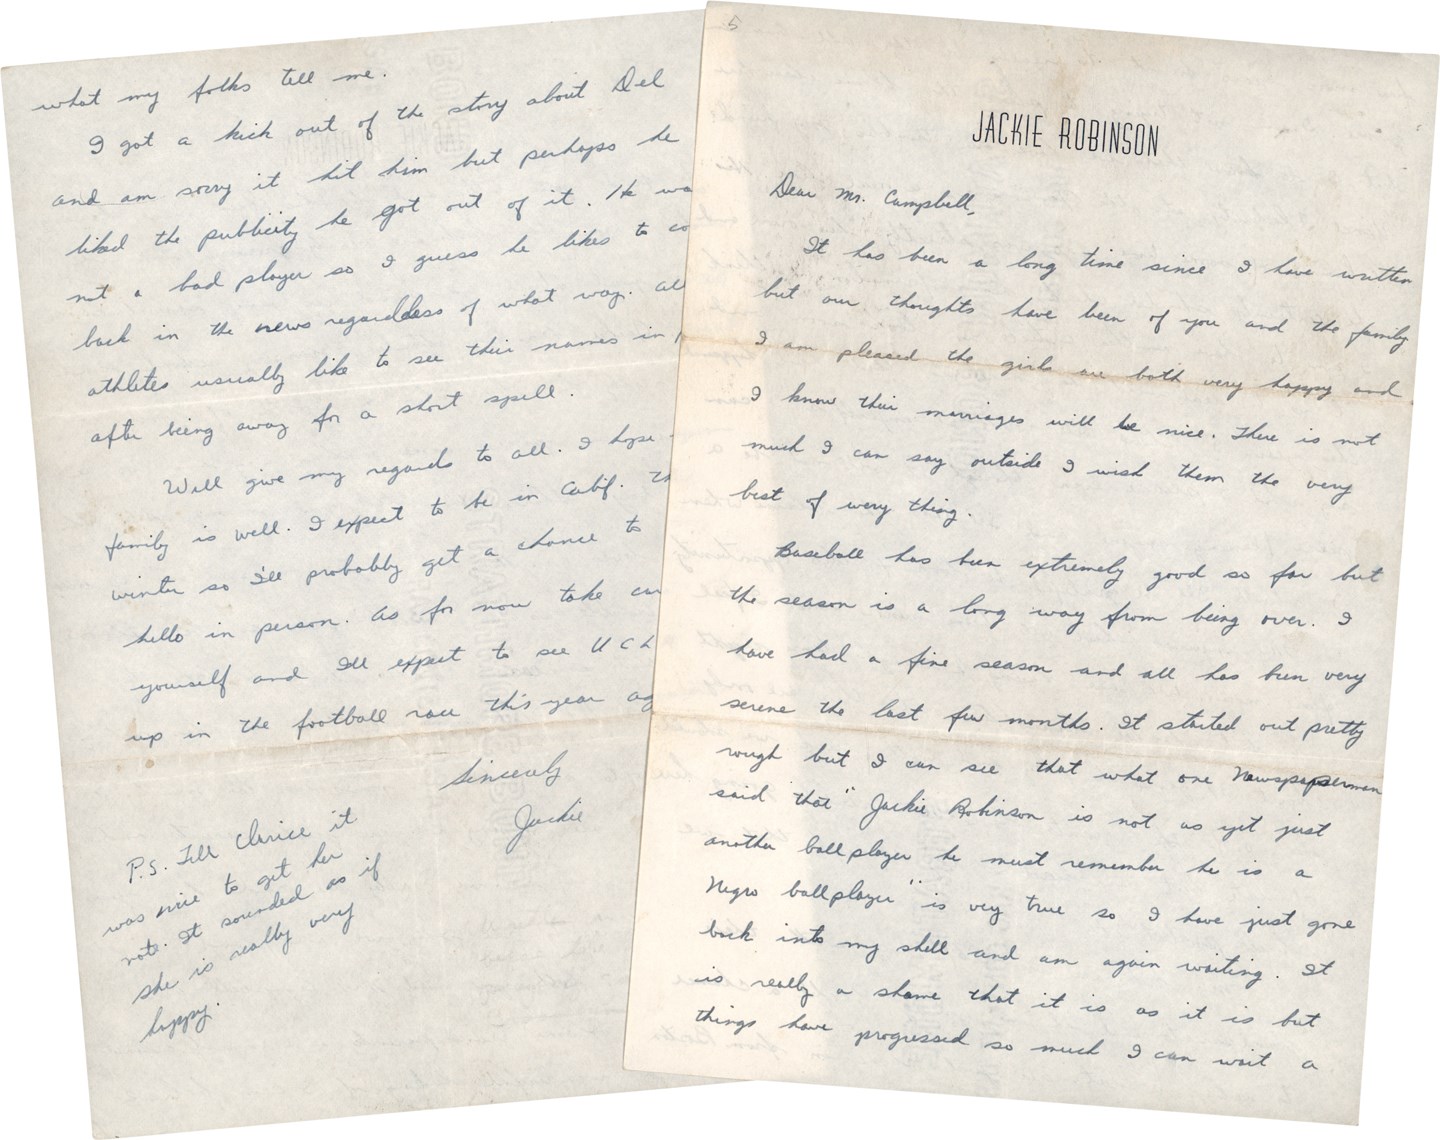 - Circa 1951 Jackie Robinson Handwritten Letter - "Jackie Robinson is Not as Yet Just Another Ballplayer, He Must Remember He is a Negro Ballplayer" (PSA)